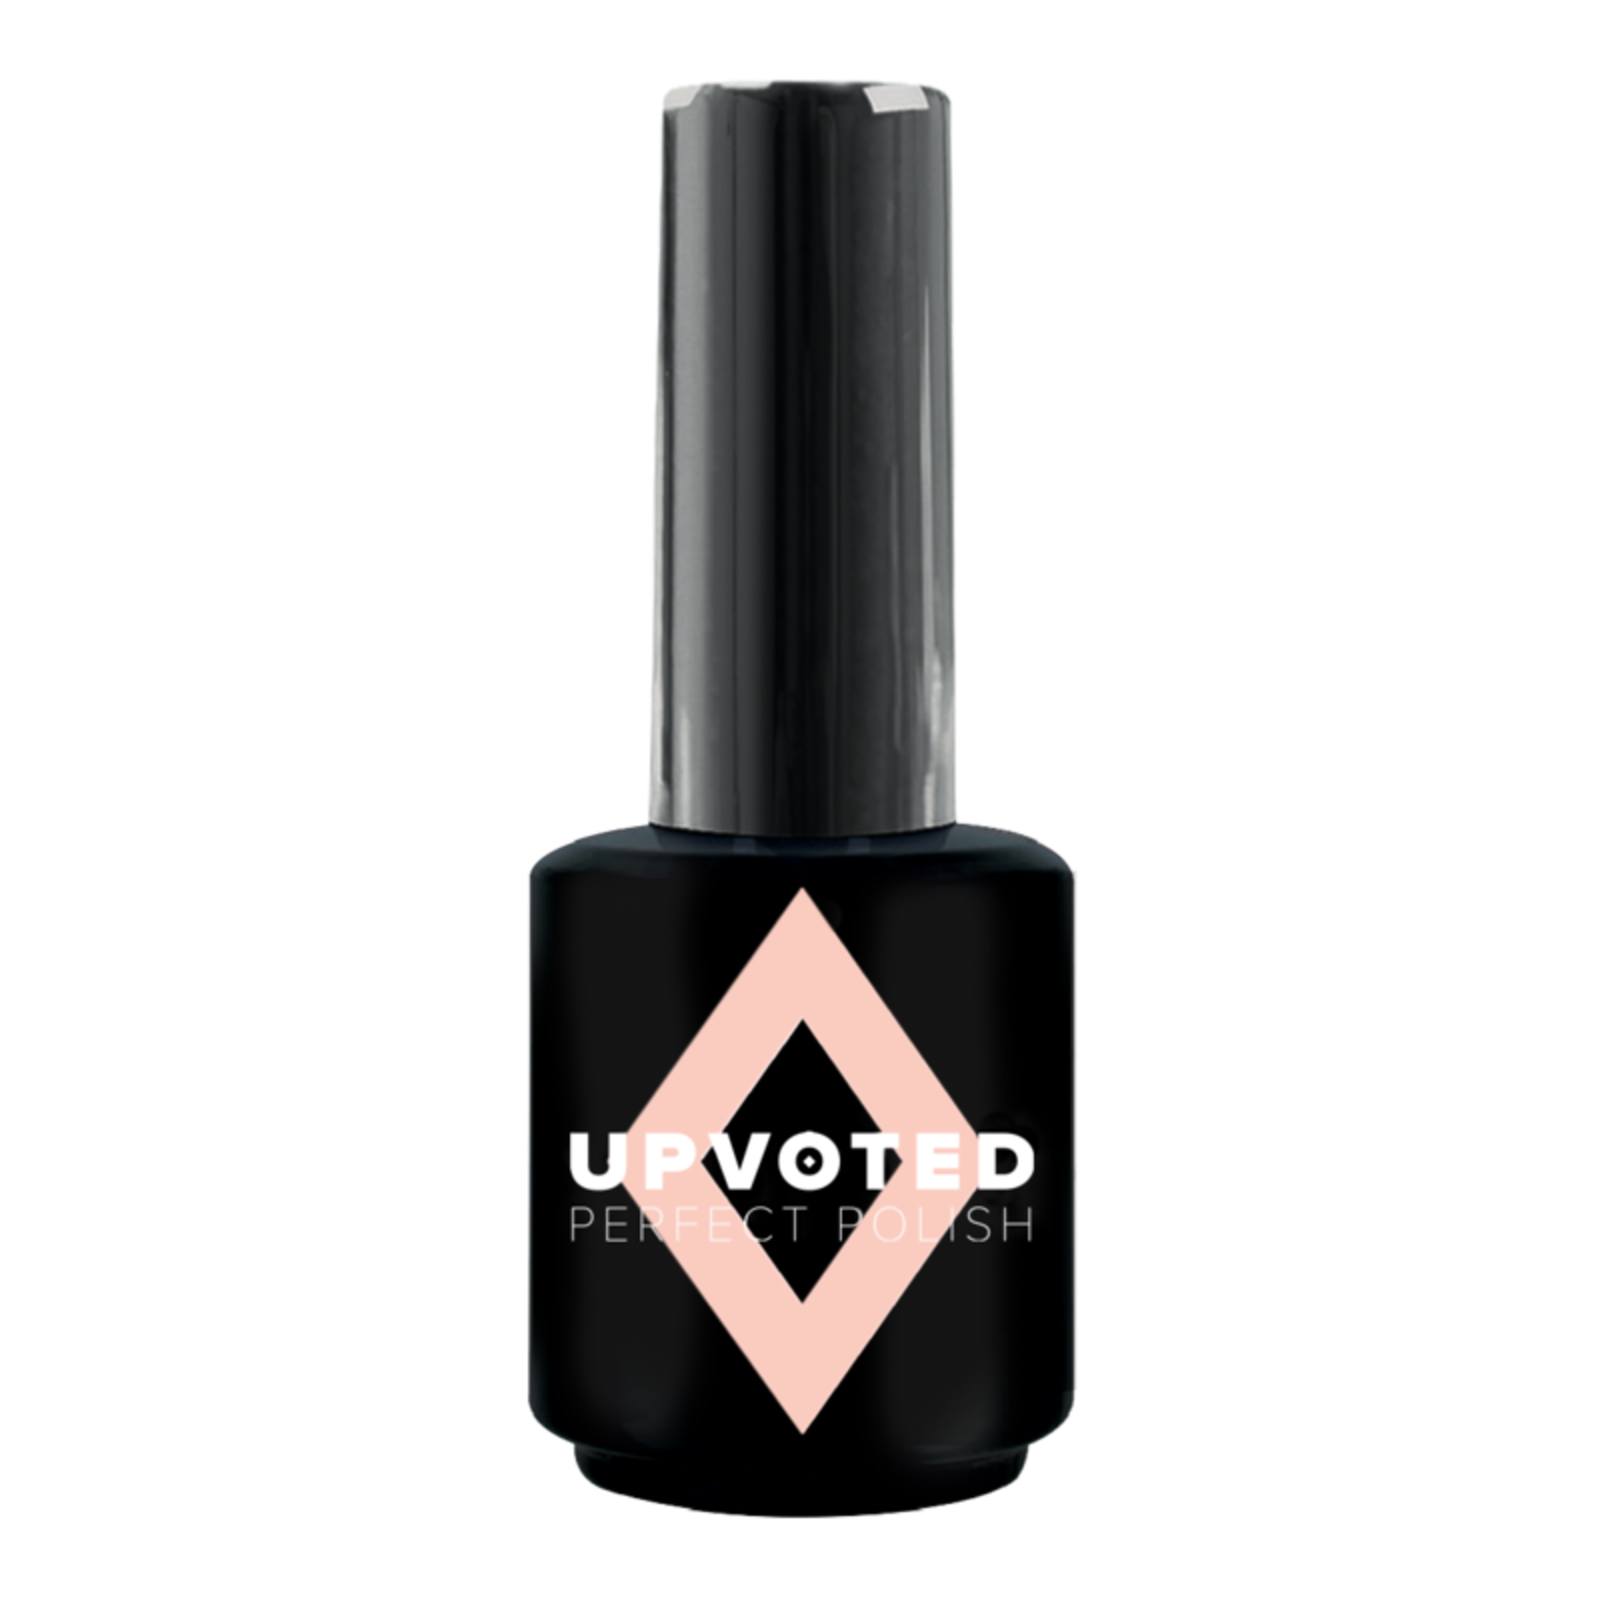 NailPerfect Upvoted #216 Almost Naked 15ml